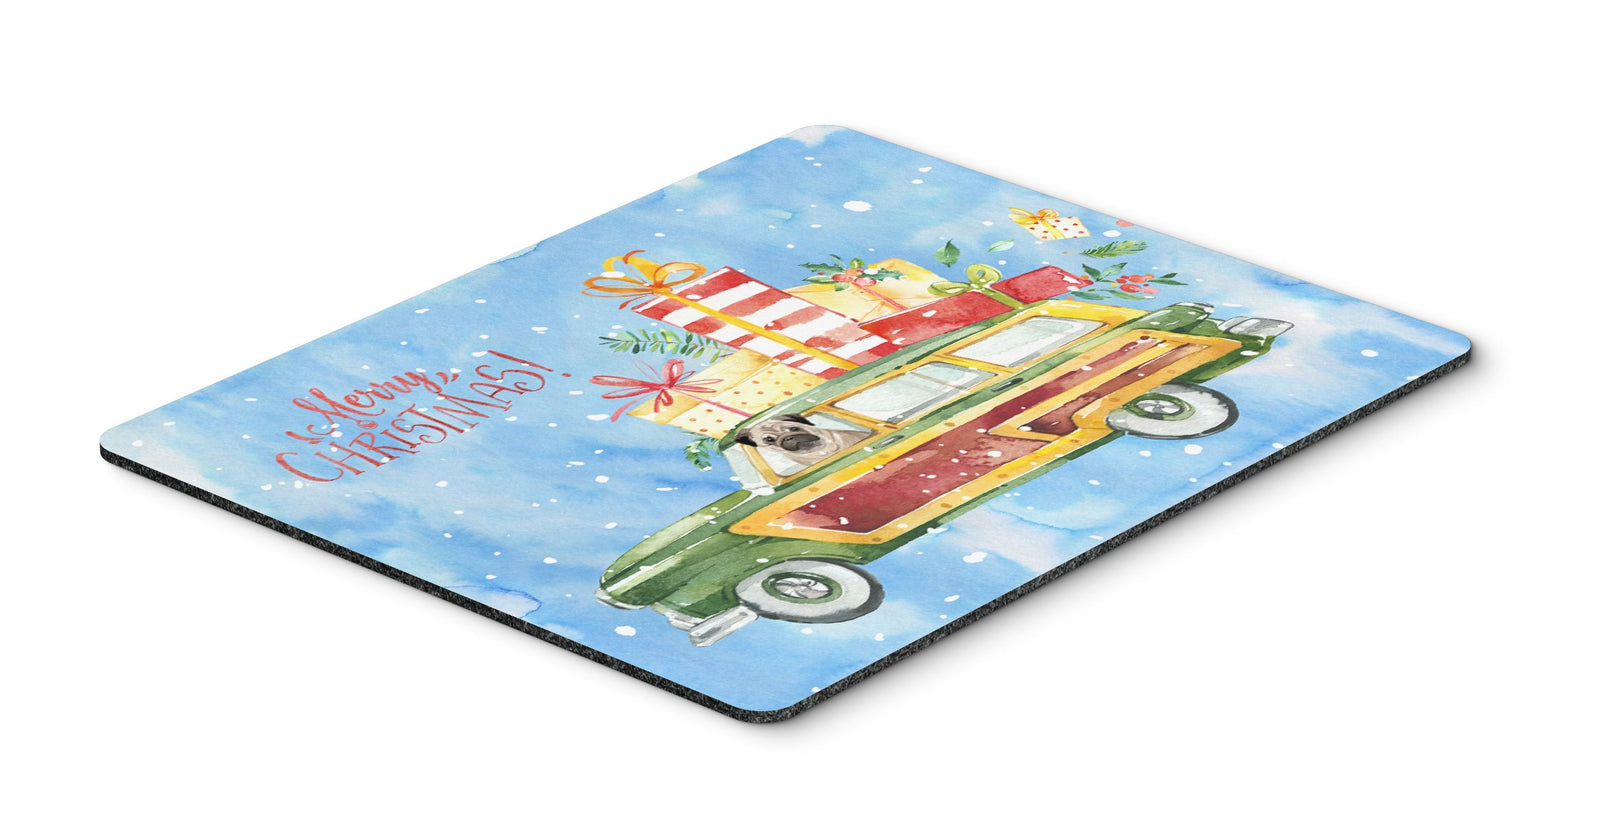 Merry Christmas Pug Mouse Pad, Hot Pad or Trivet CK2463MP by Caroline's Treasures